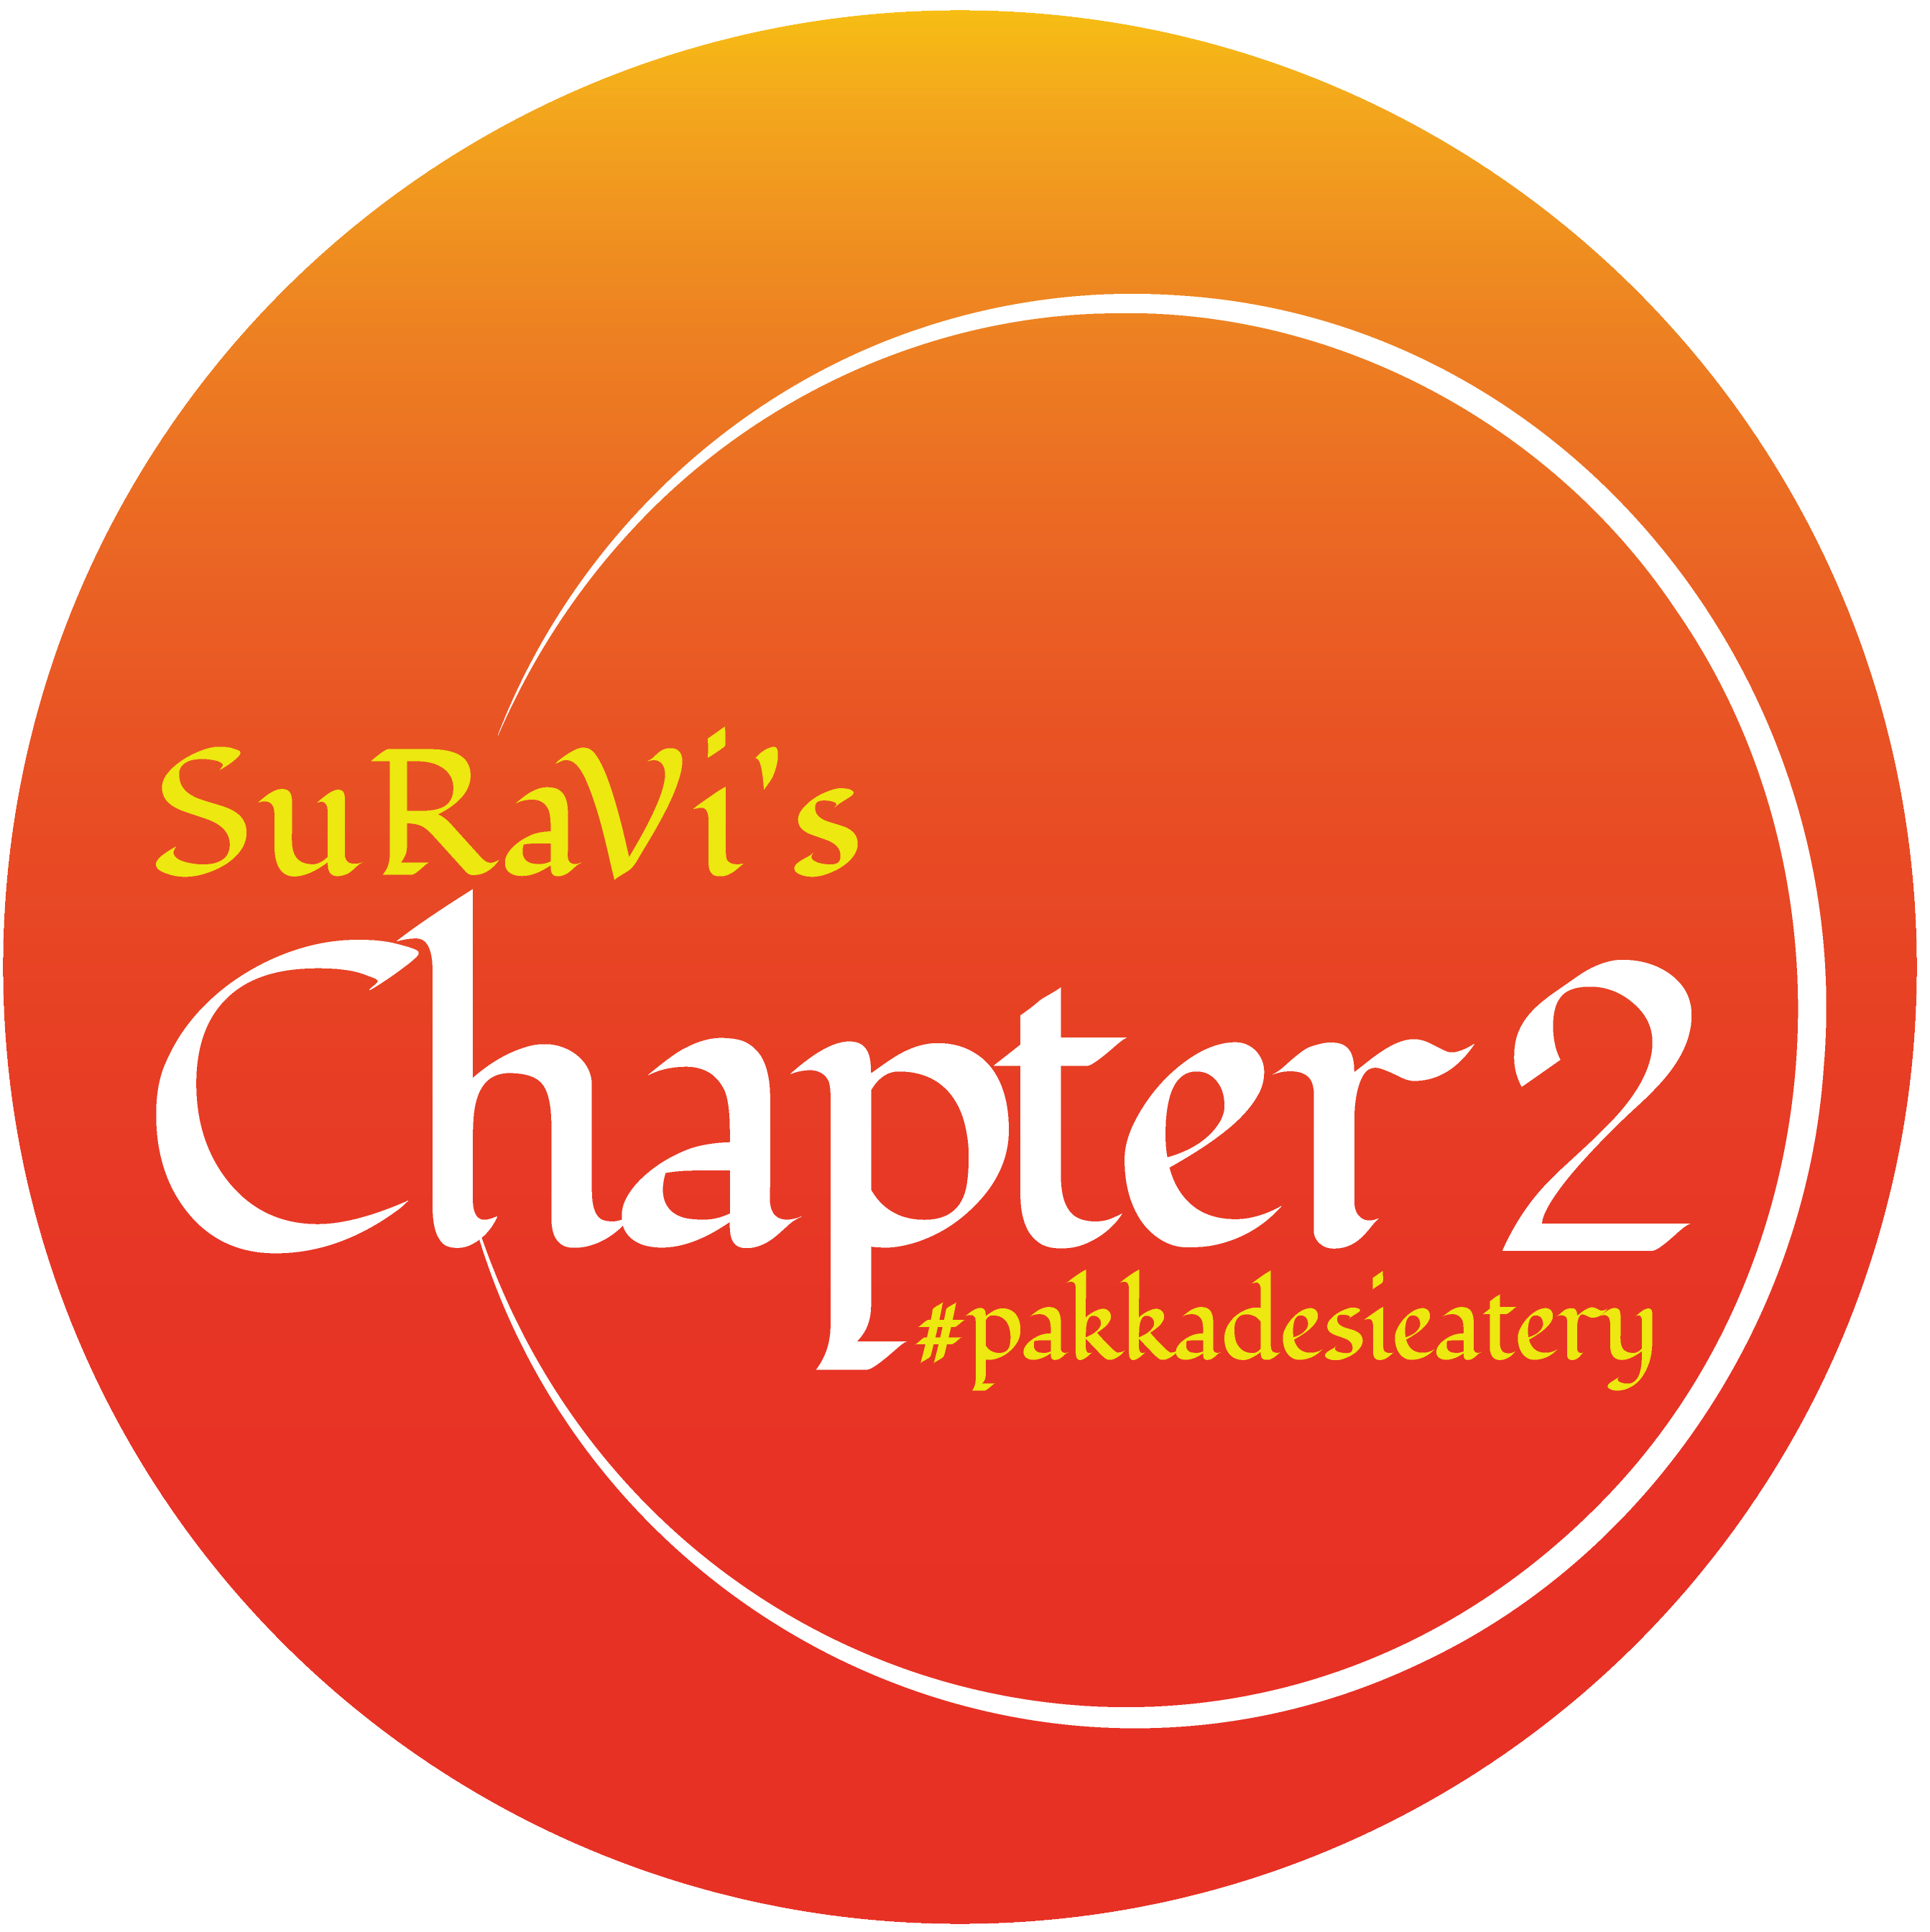 Suravi's Chapter 2